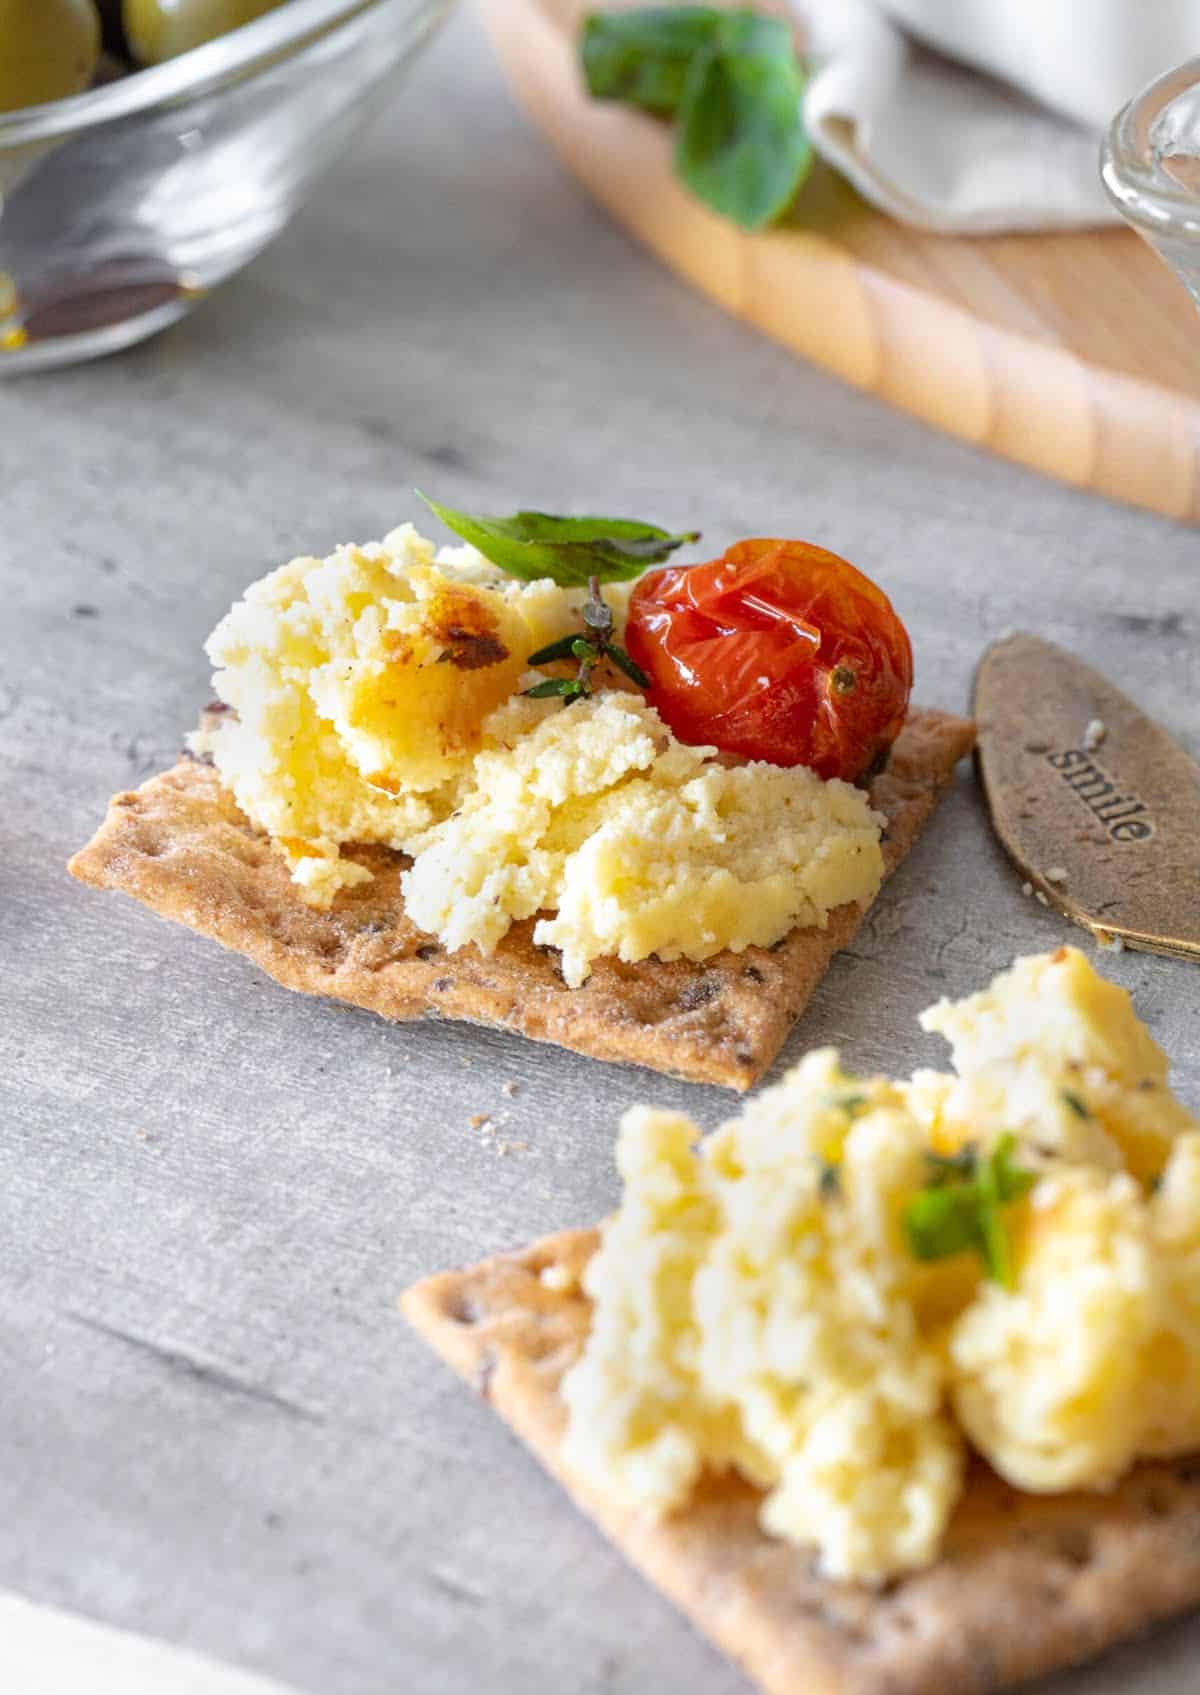 Crackers with baked ricotta, cherry tomato, and herbs on grey surface.